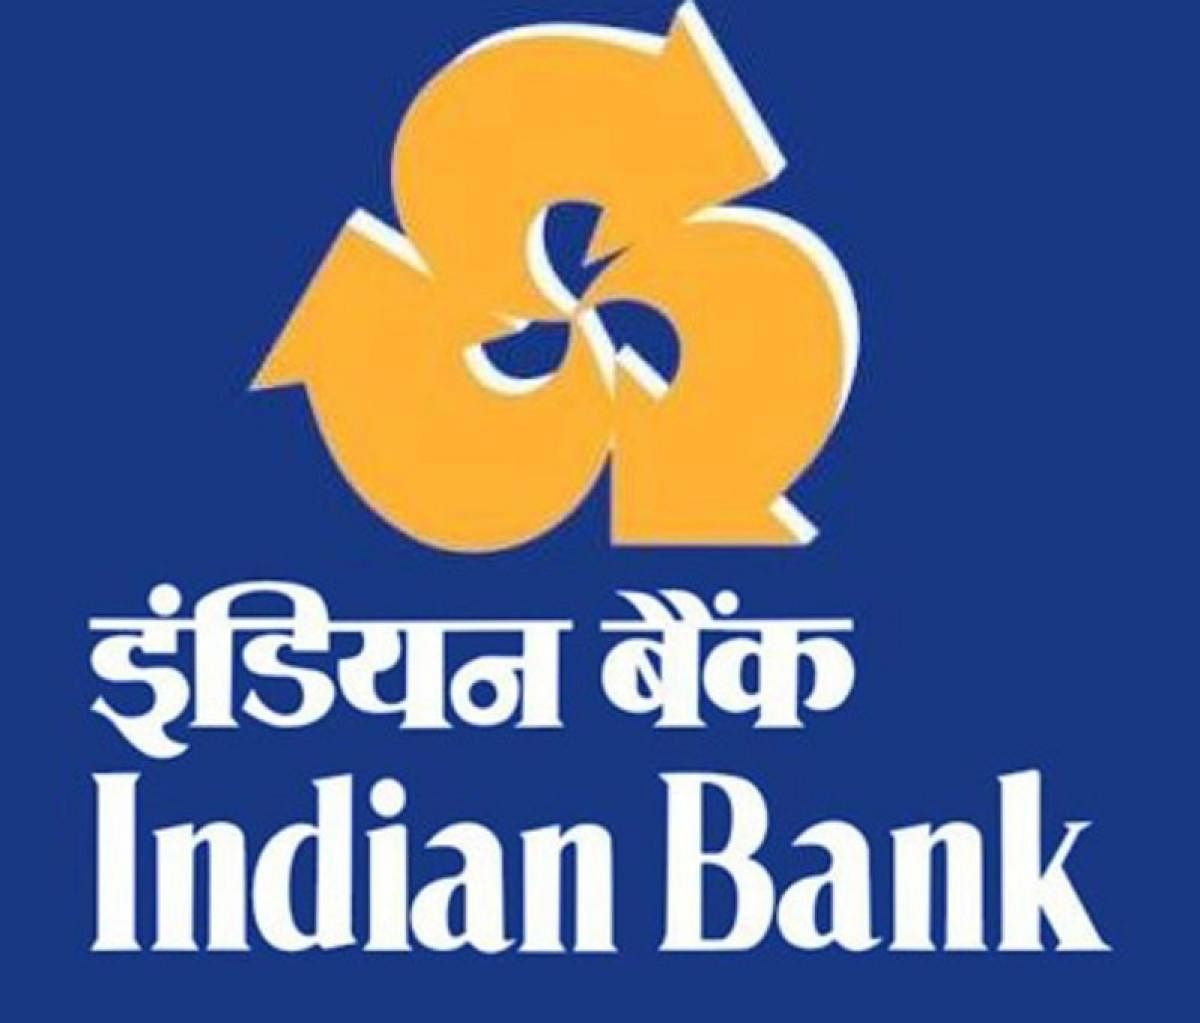 Customers will not face any disruption: Indian Bank on merging Allahabad Bank with itself